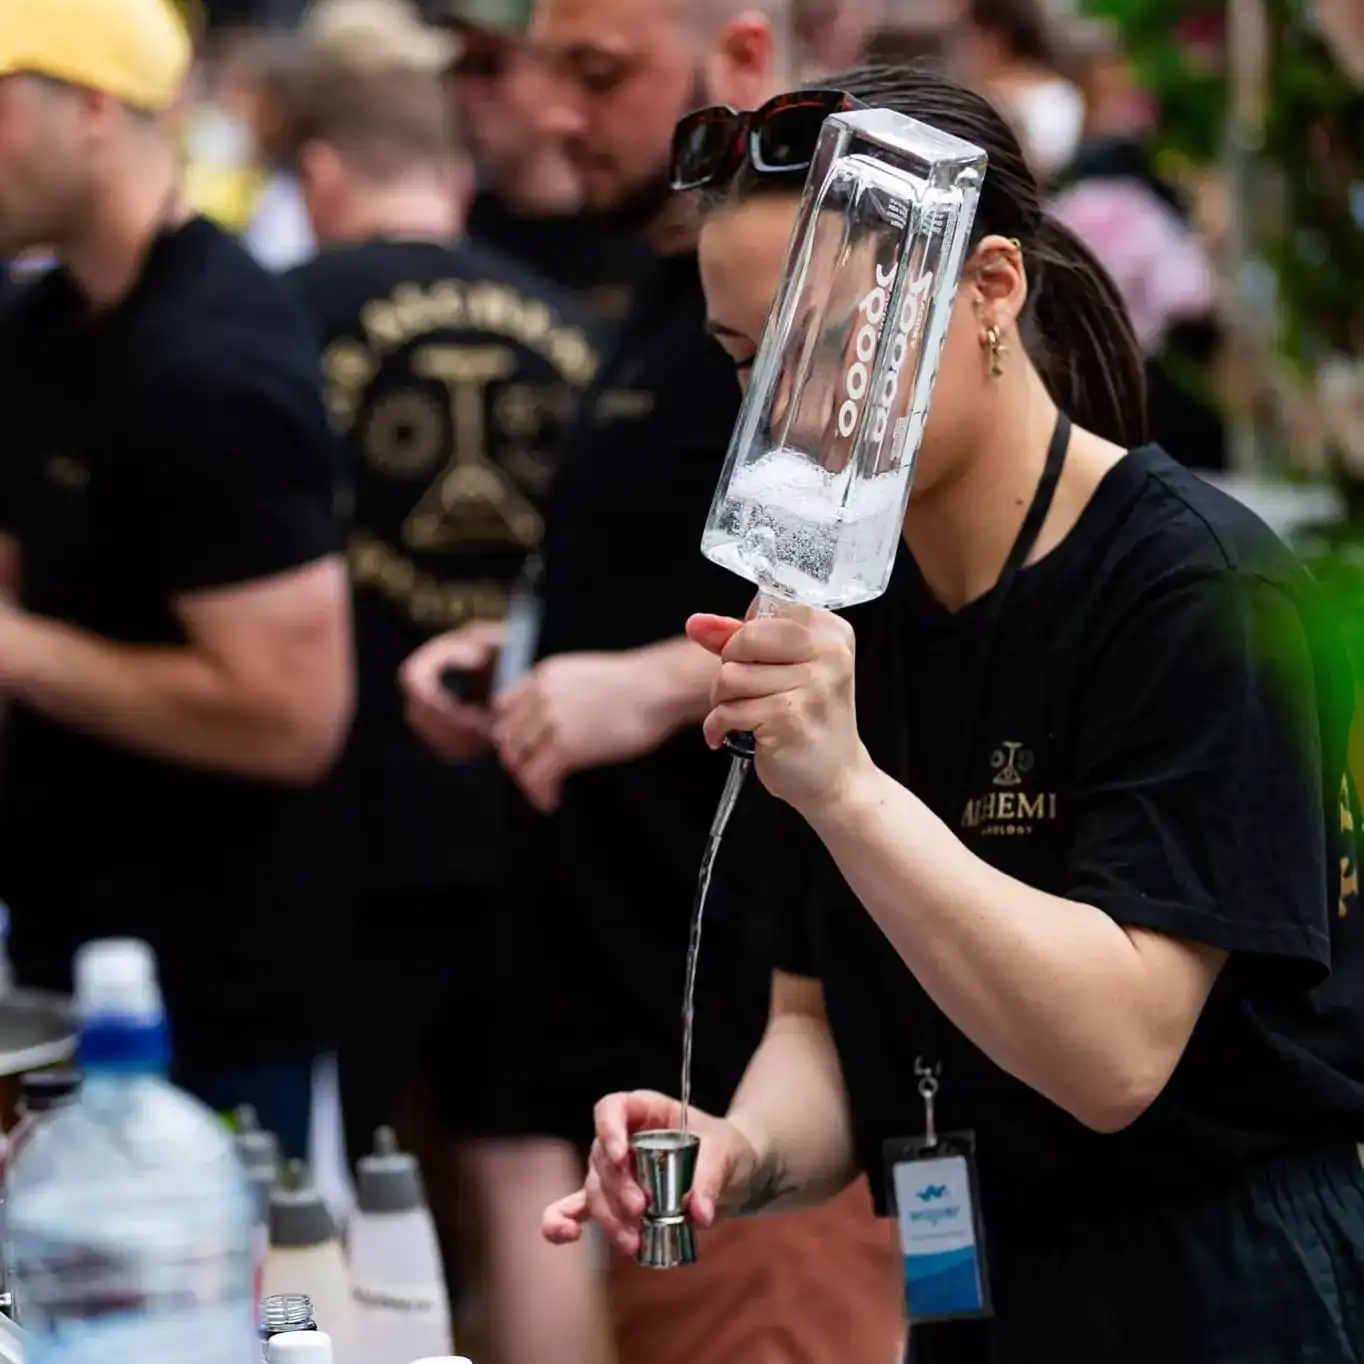 at a festival, a bartender skillfully pours a vodka from a height to prepare a cocktail